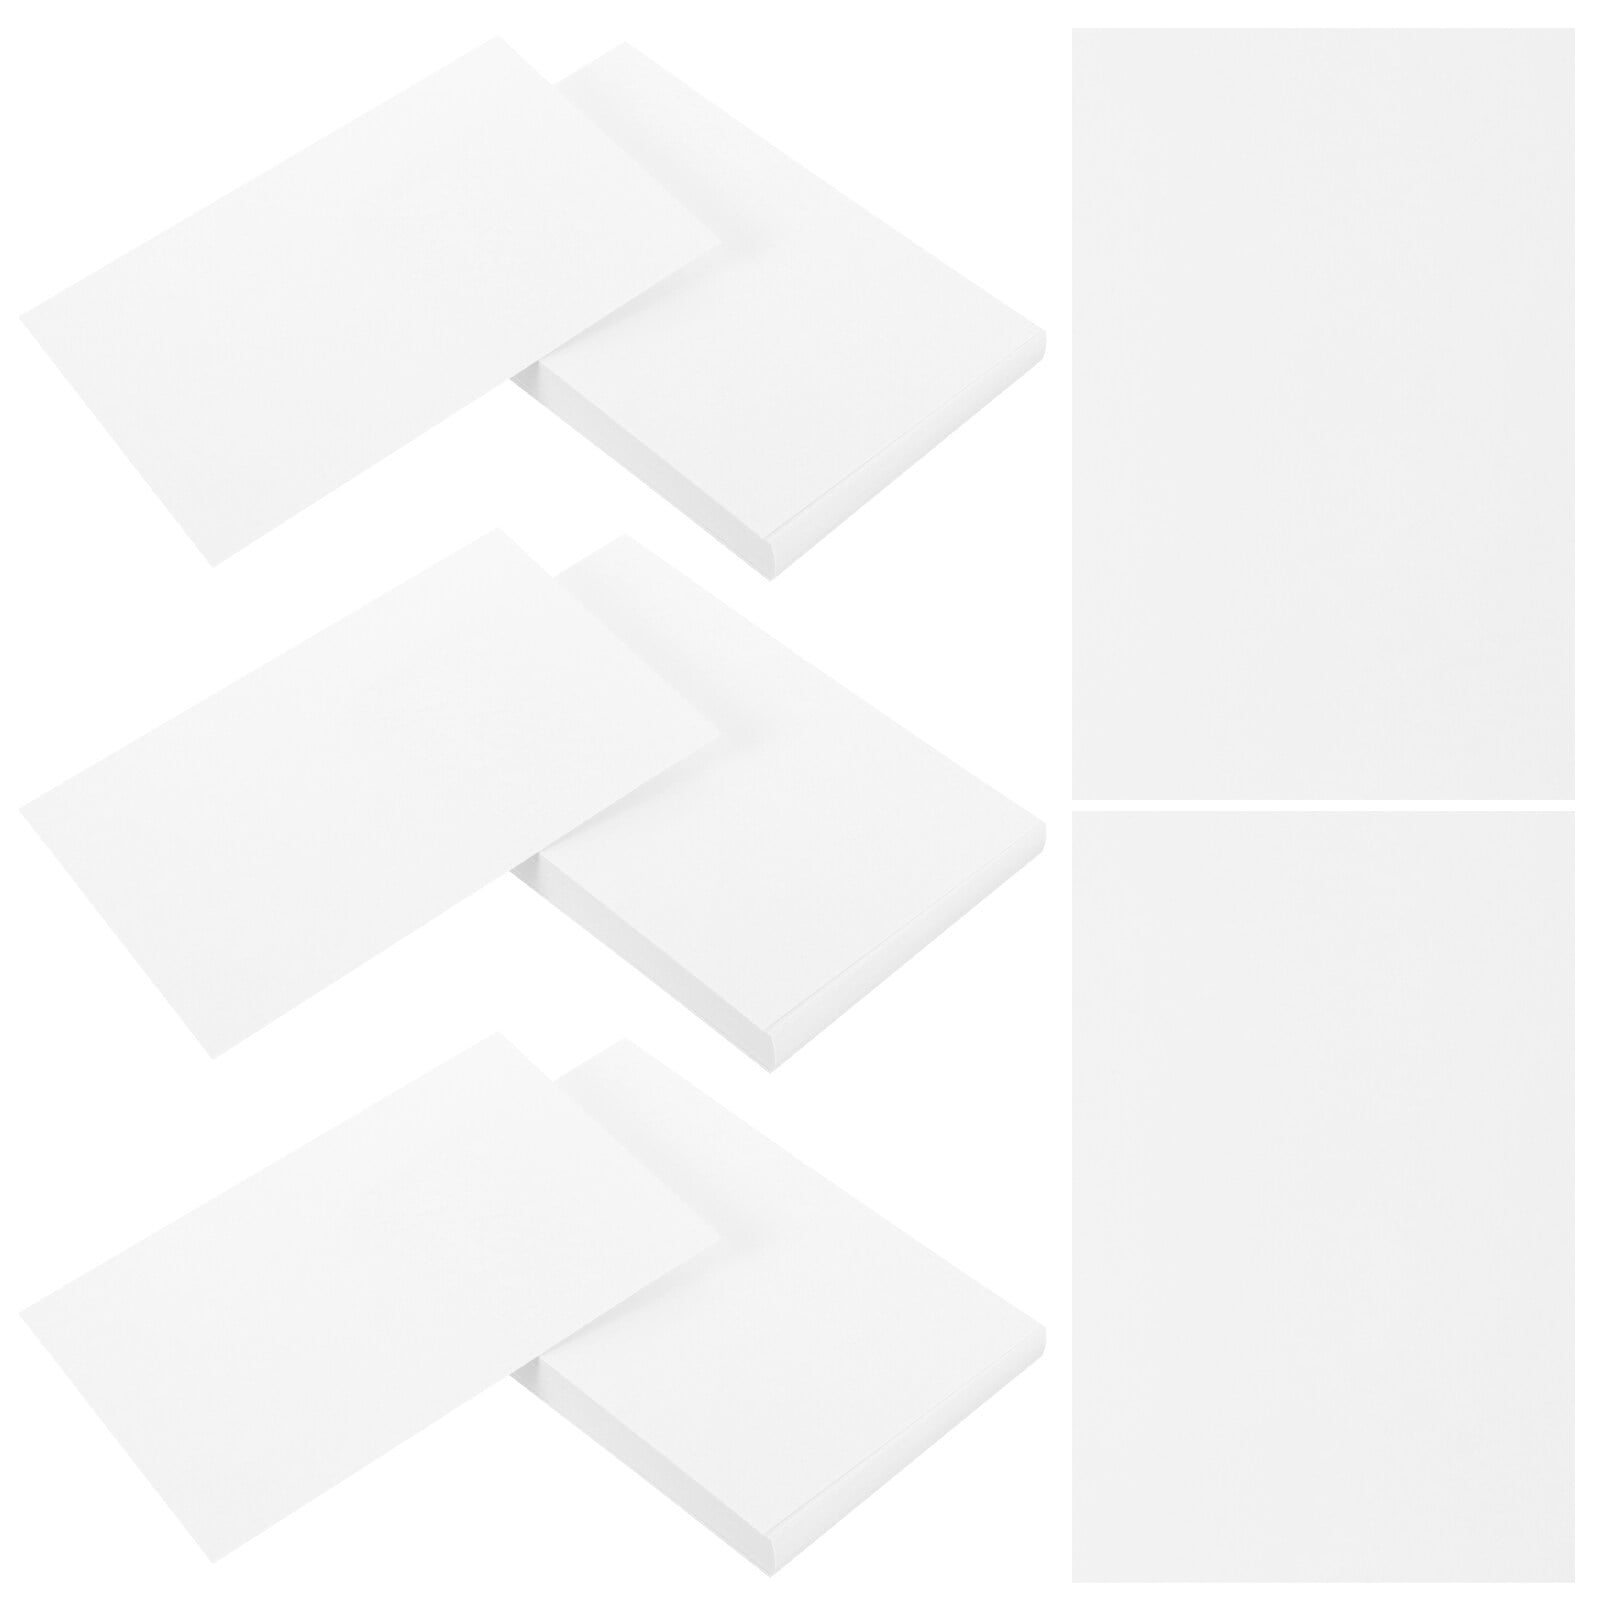 50pcs Blank Cards Flash Cards Memo Card Note Cards DIY Greeting Cards  Postcards 